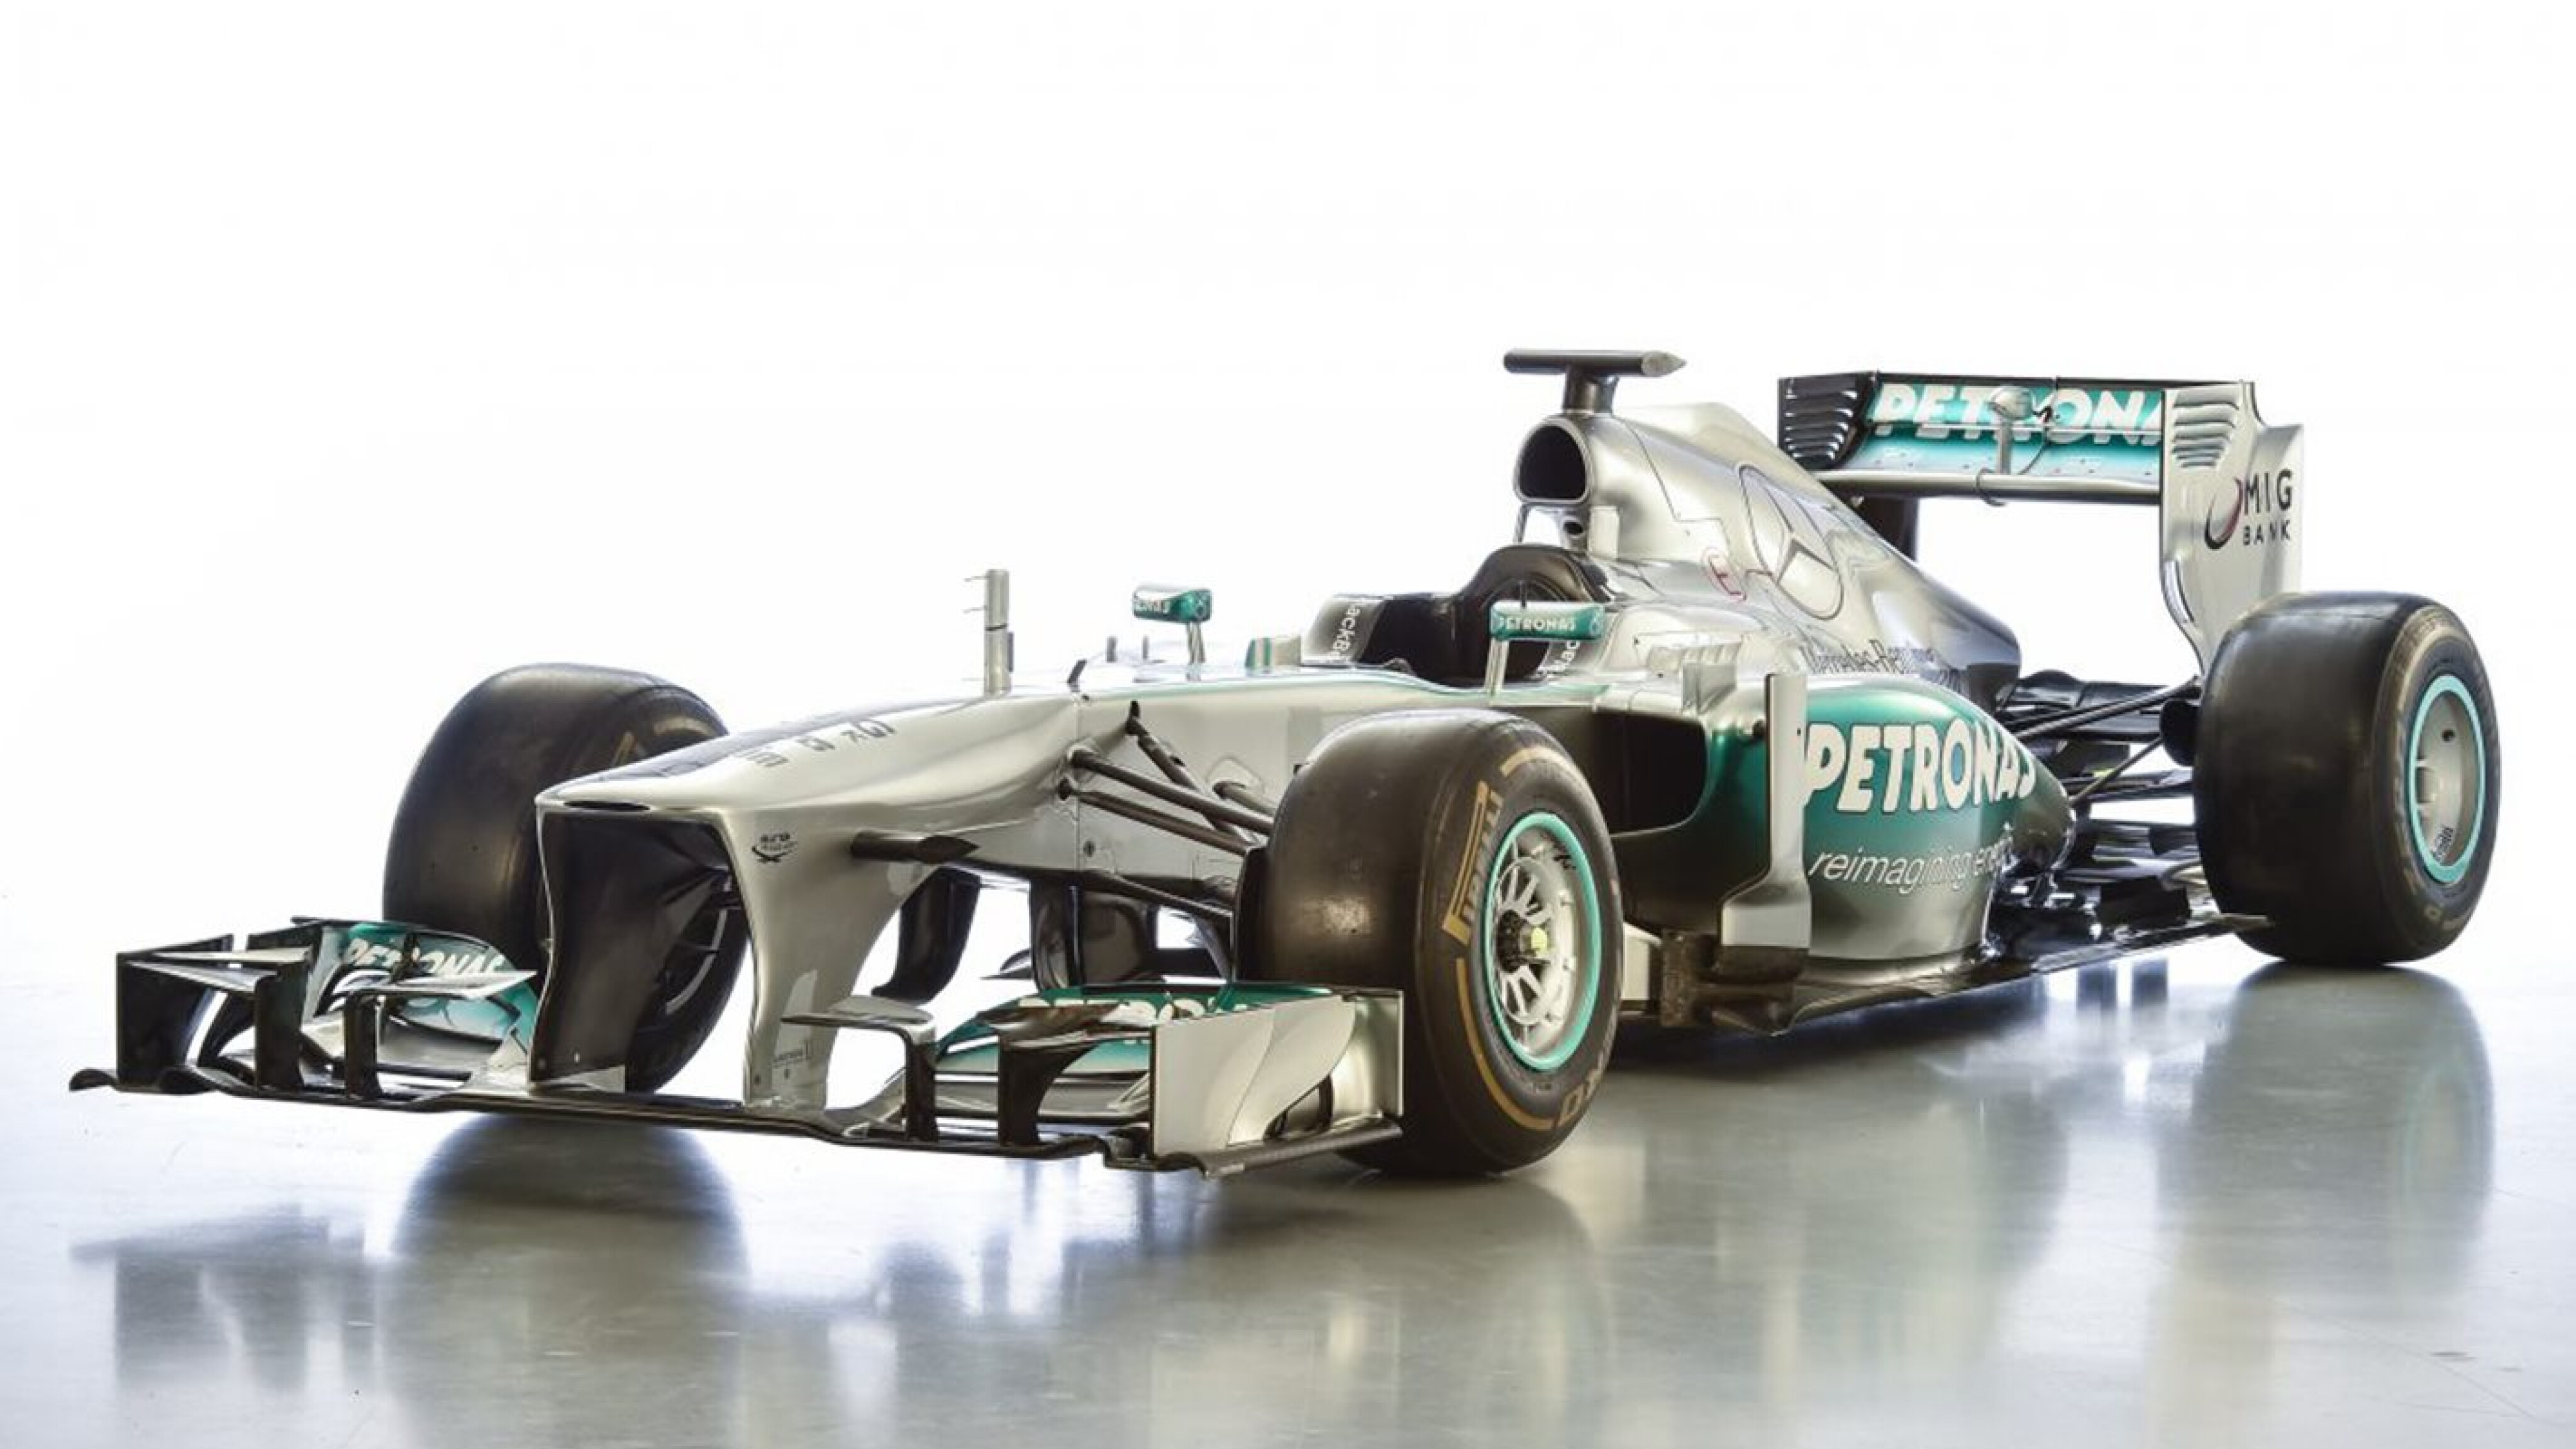 Lewis Hamilton's first race-winning Mercedes F1 car is going up for auction